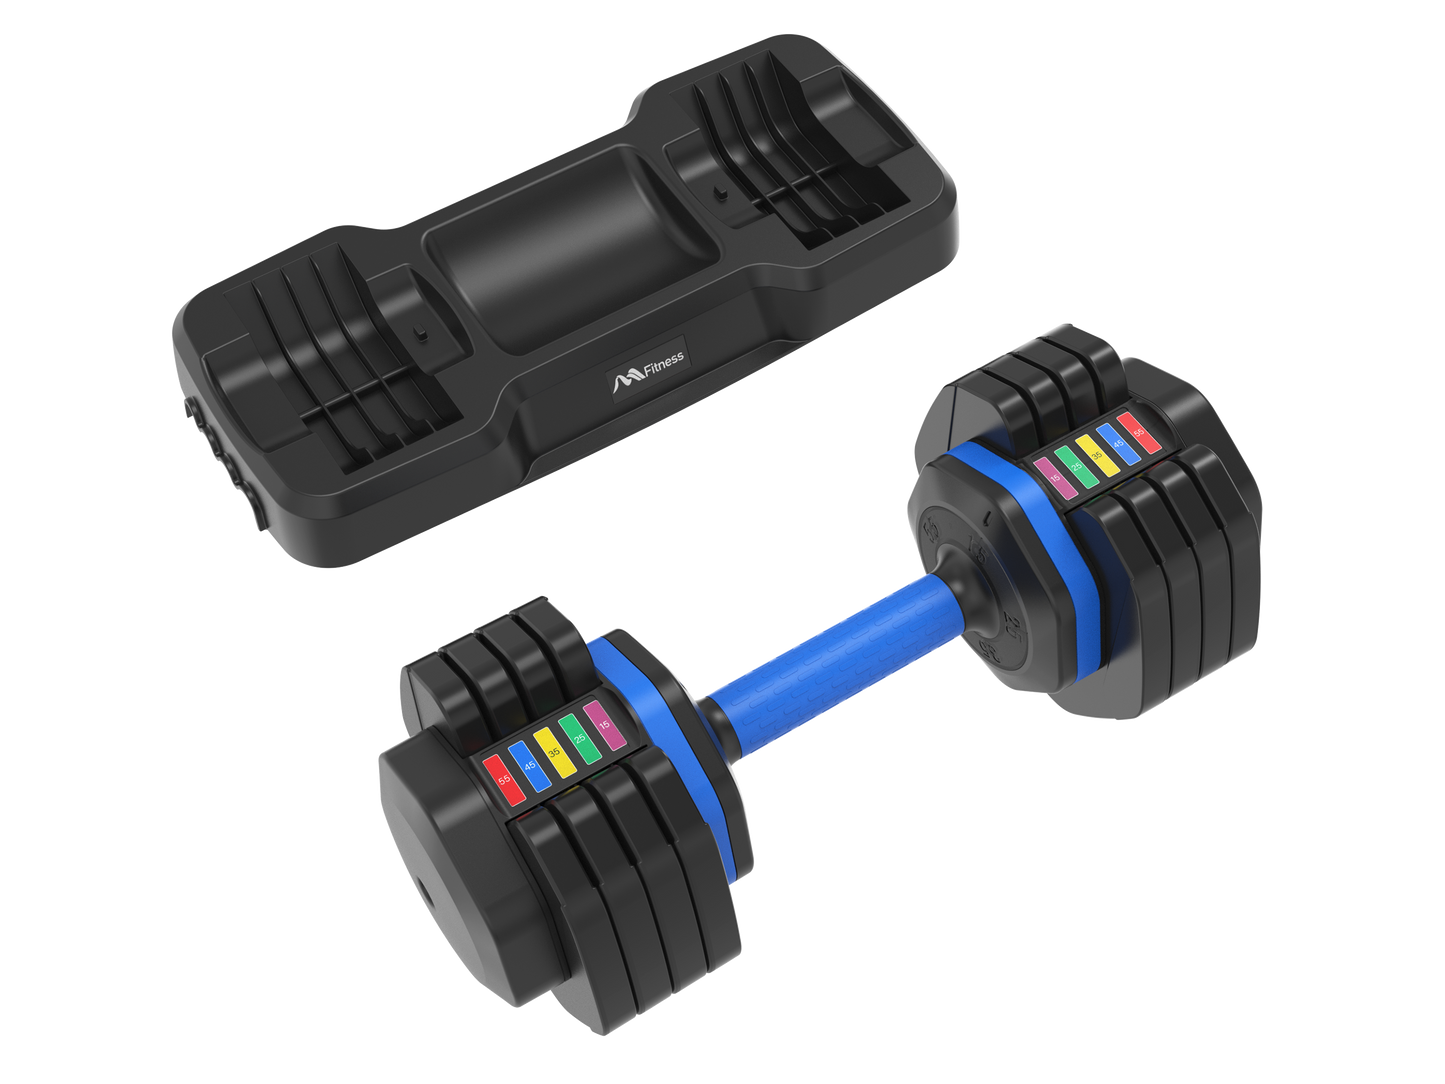 Adjustable 55lb Dumbbell Set of 2 with Anti-Slip Handle